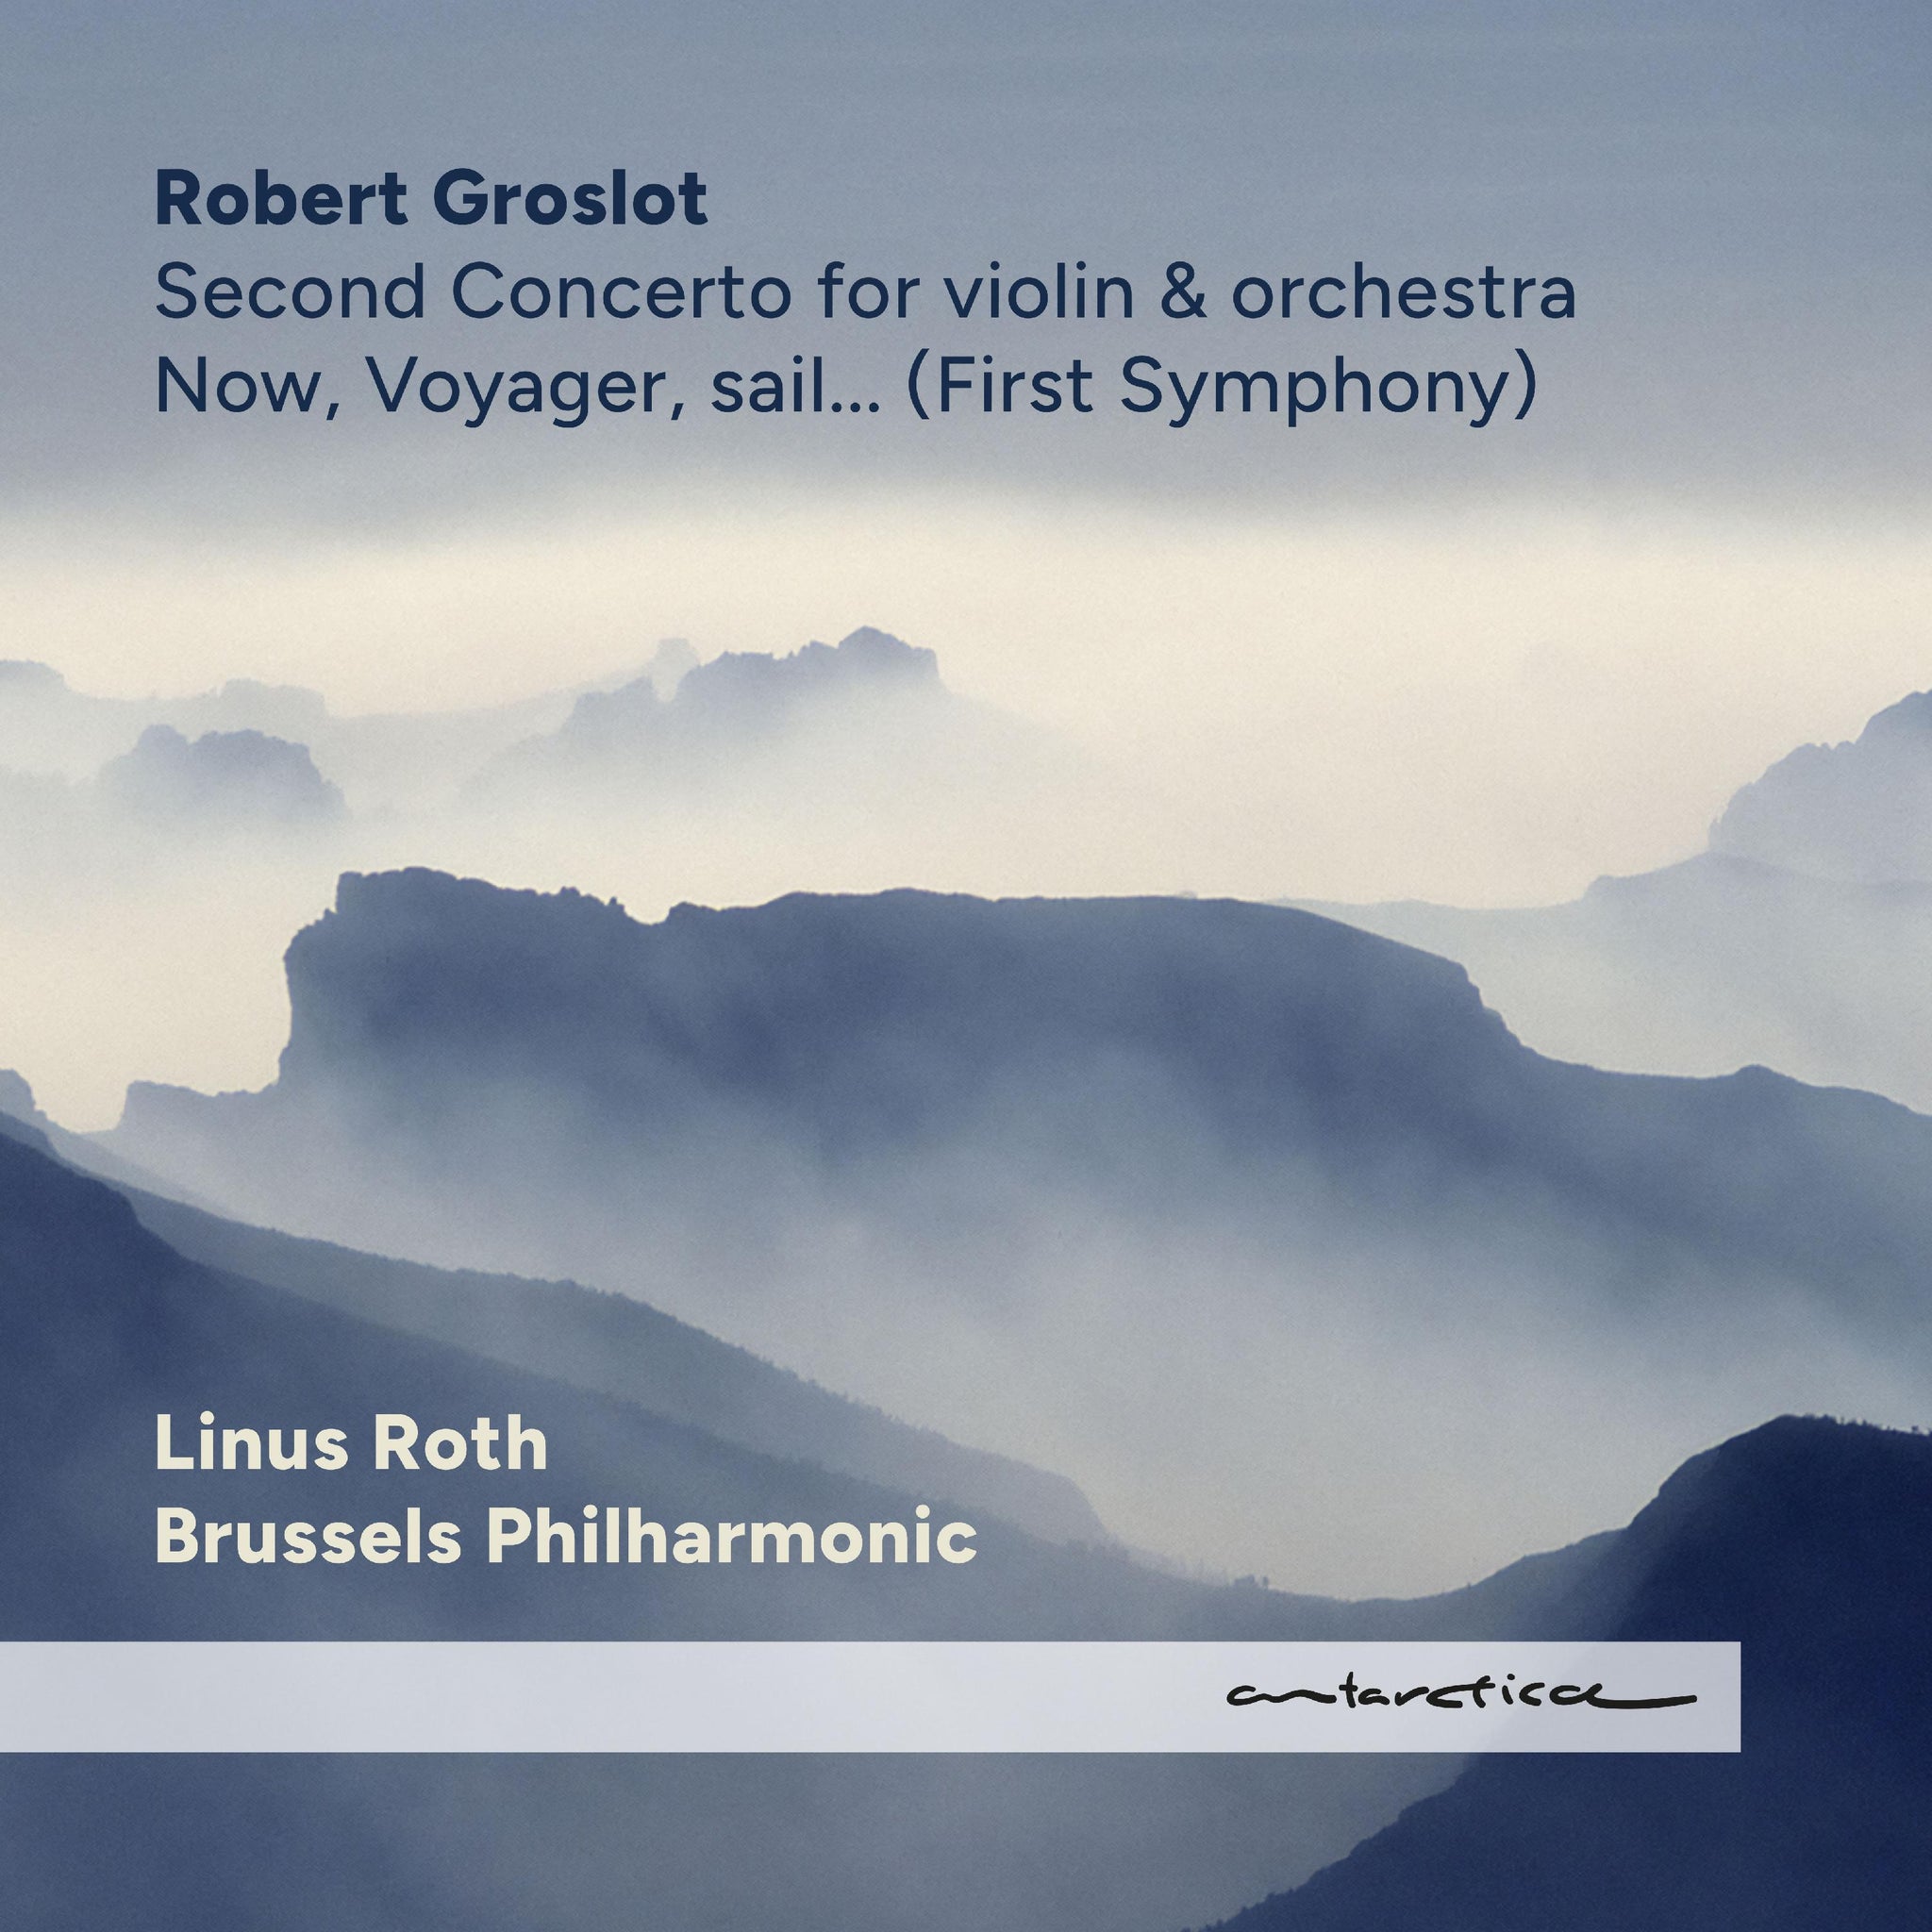 Groslot: Now, Voyager, sail... / Roth, Brussels Philharmonic